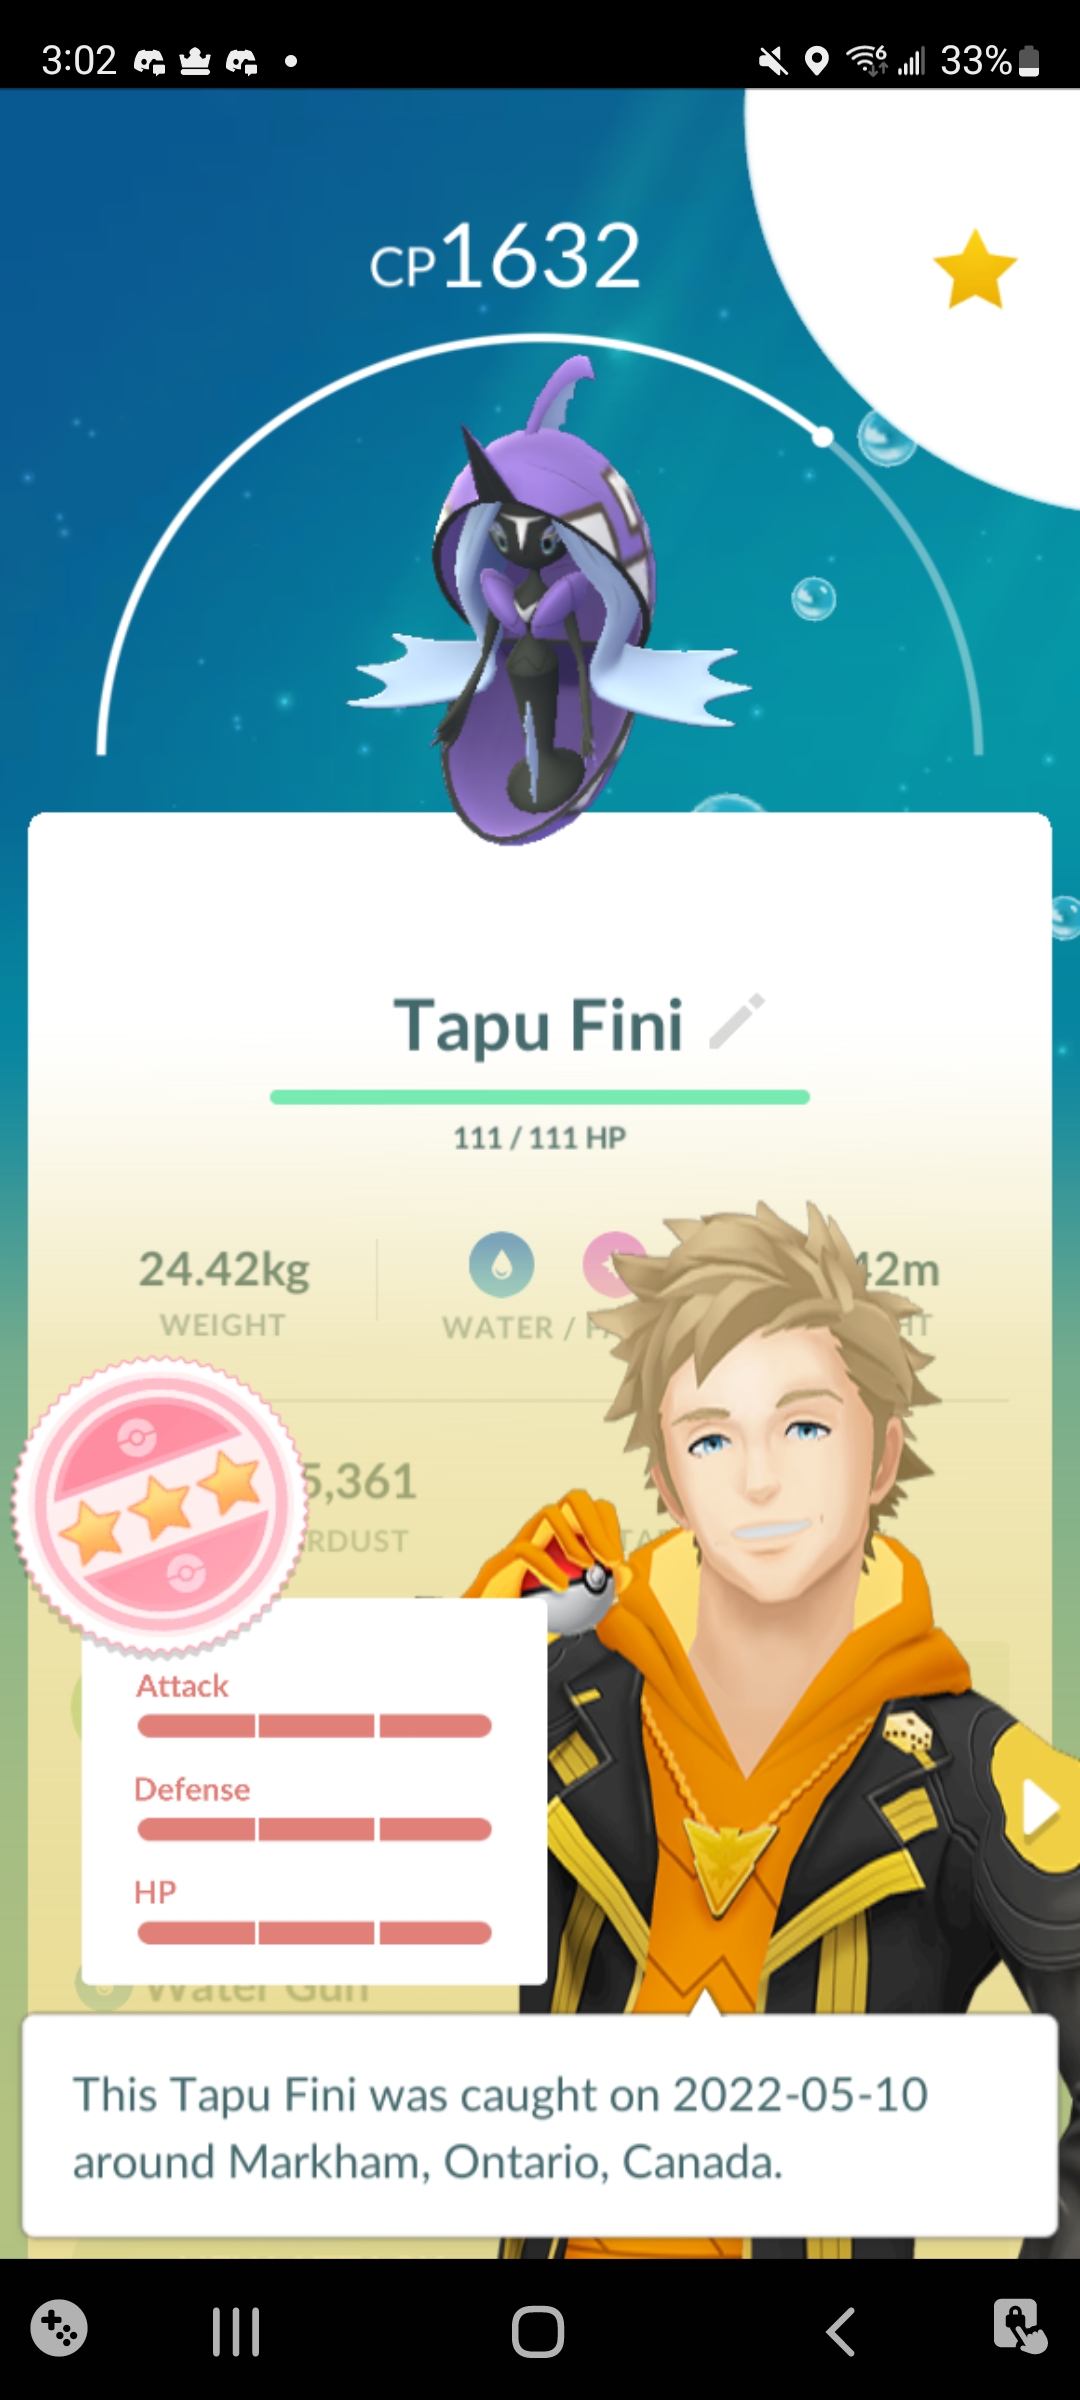 Pokemon Go May 2022 Events: Tapu Fini, Spotlight Hours and More - CNET